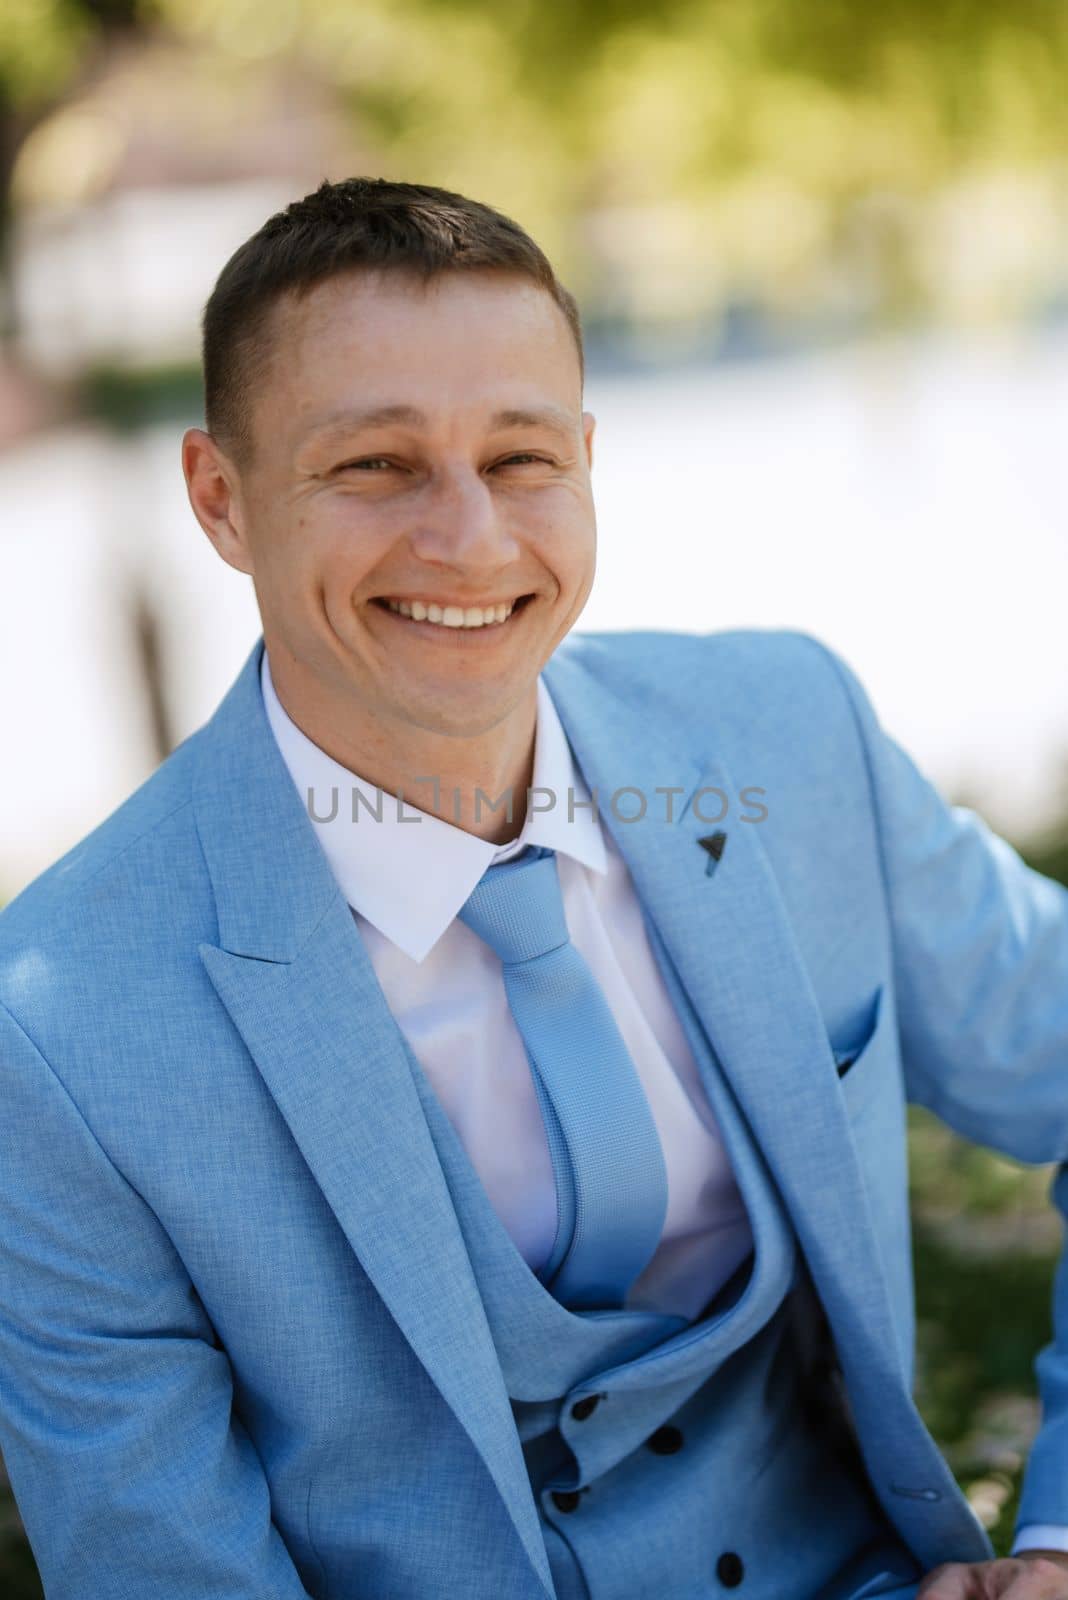 portrait of the groom's boyfriend in a blue suit smiling by Andreua